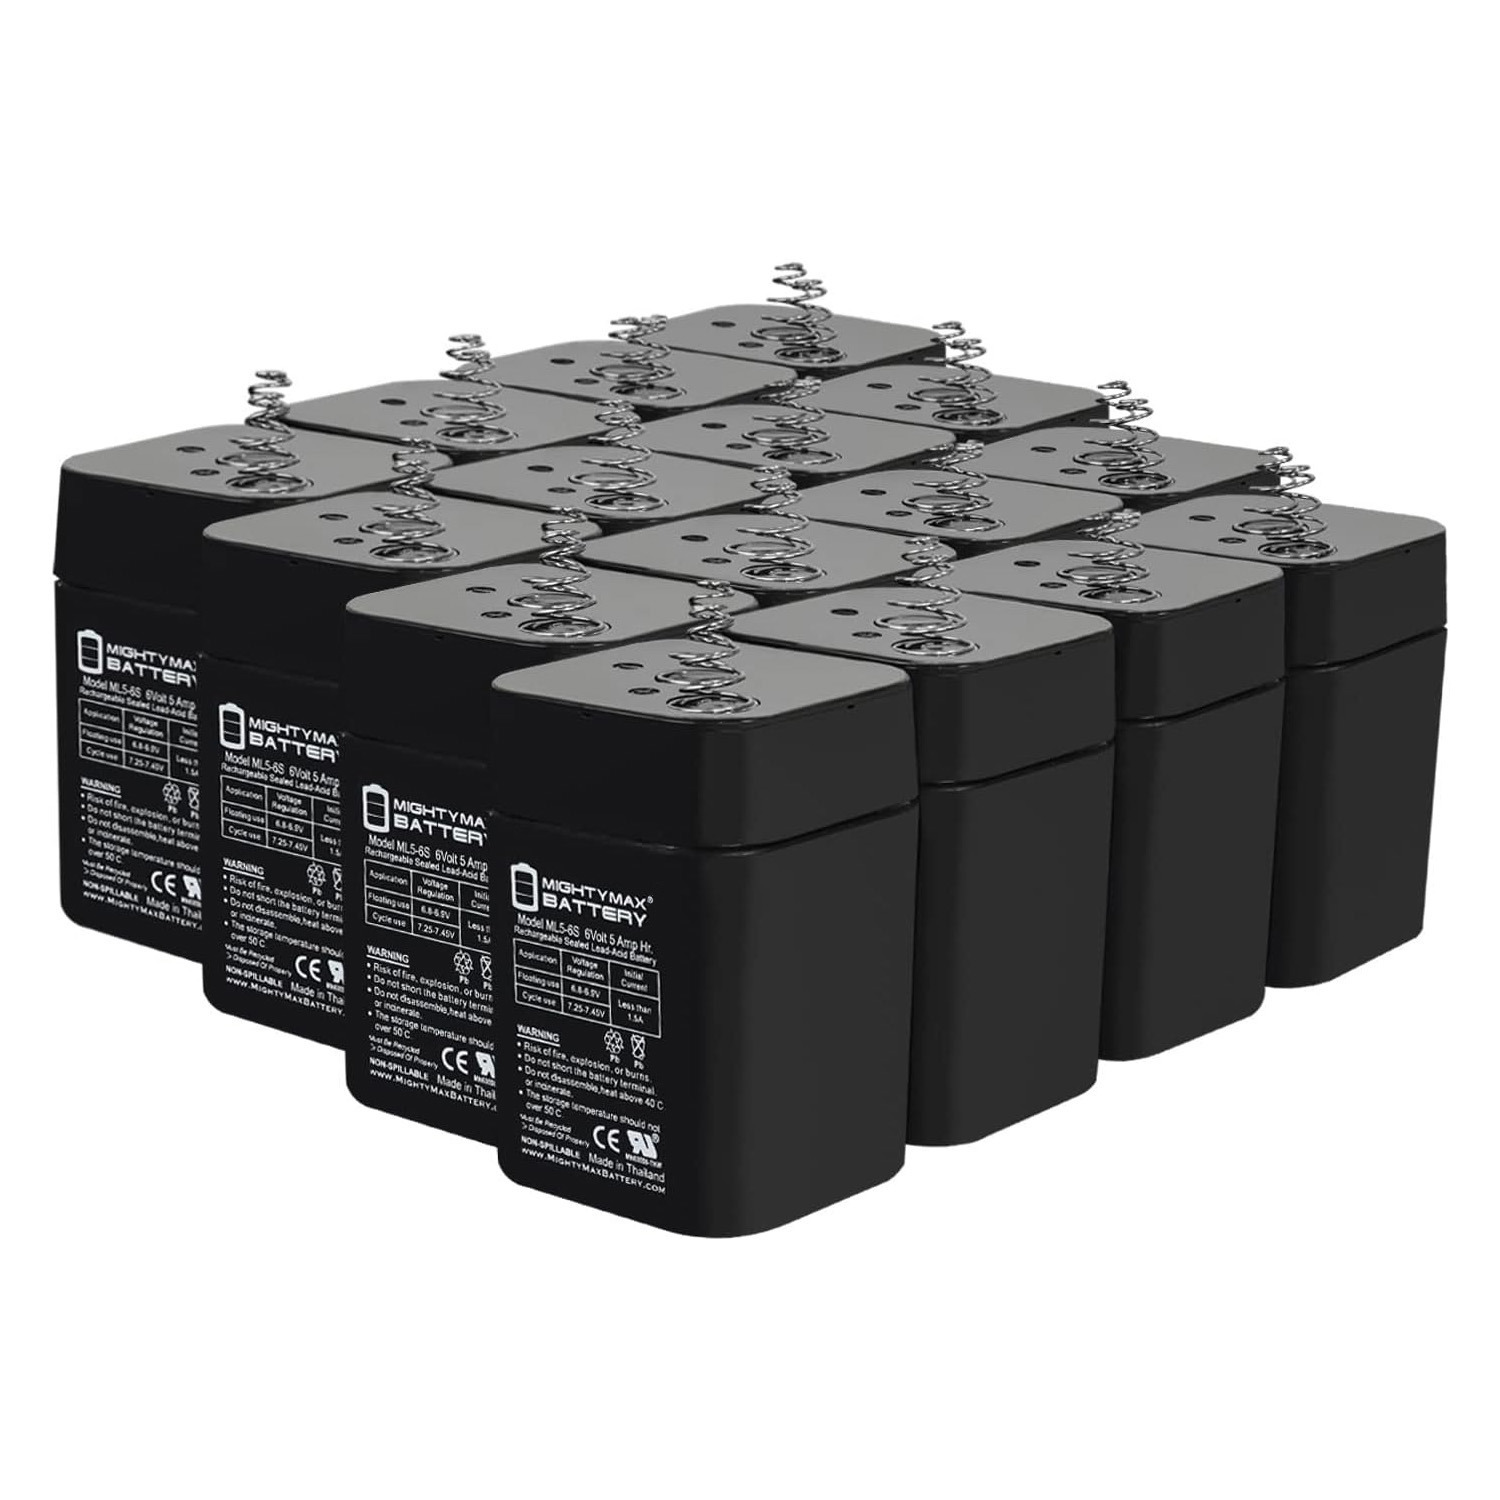 6V 5AH SLA Replacement Battery Compatible with Mojo HW4401-HW4501 - 16 Pack